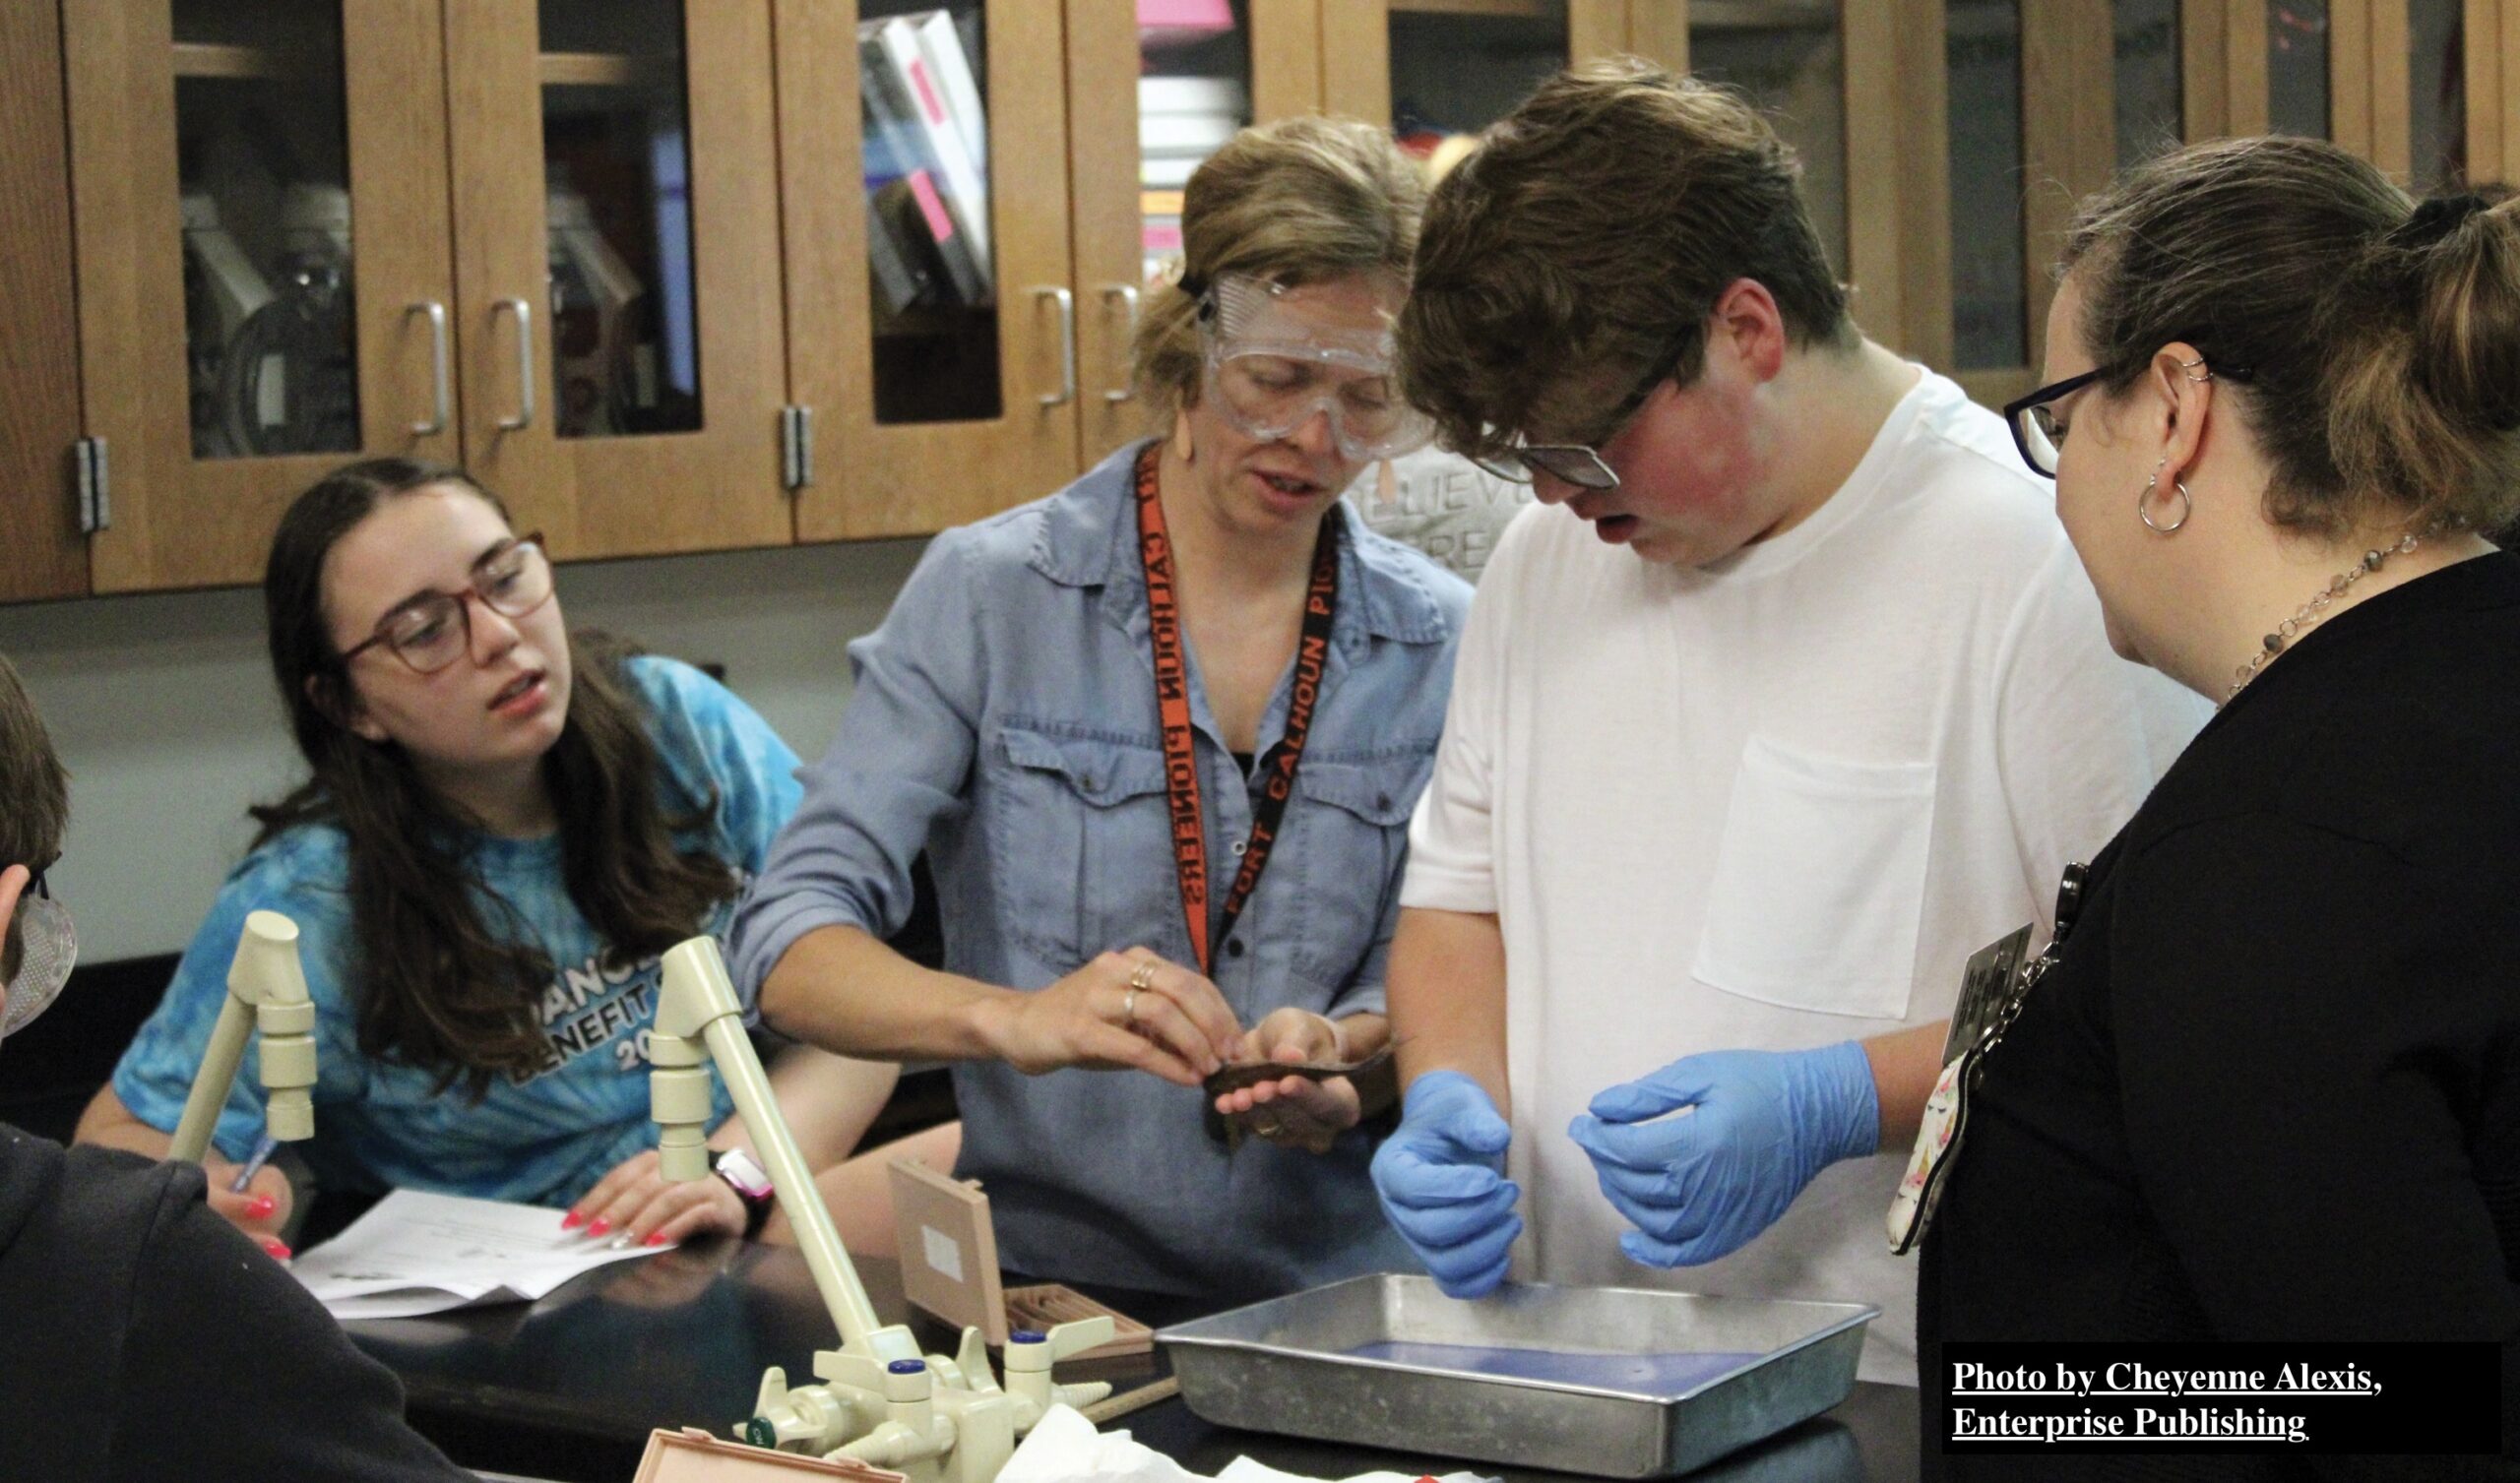 From left, Jordin Woebecke, Ashlie Nelson, William Anderson and Michelle Doyle examine a perch prior to dissection.